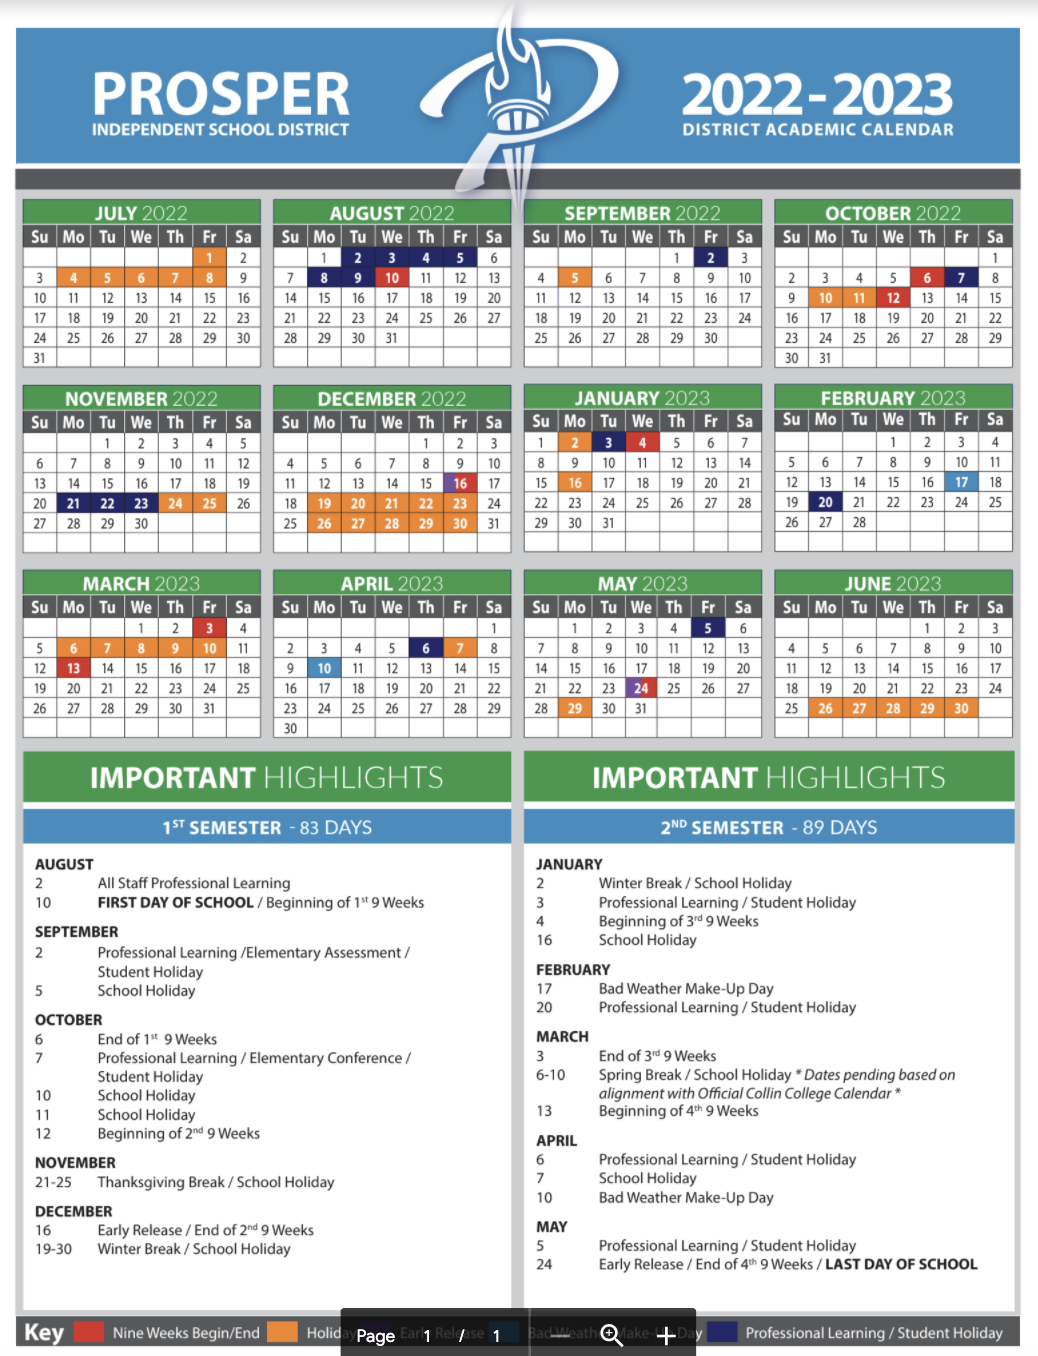 Fisd Calendar 2022 Here Are Prosper Isd's School Calendars For The 2022-2023 And The 2023-2024  School Years | Cities | Checkoutdfw.com